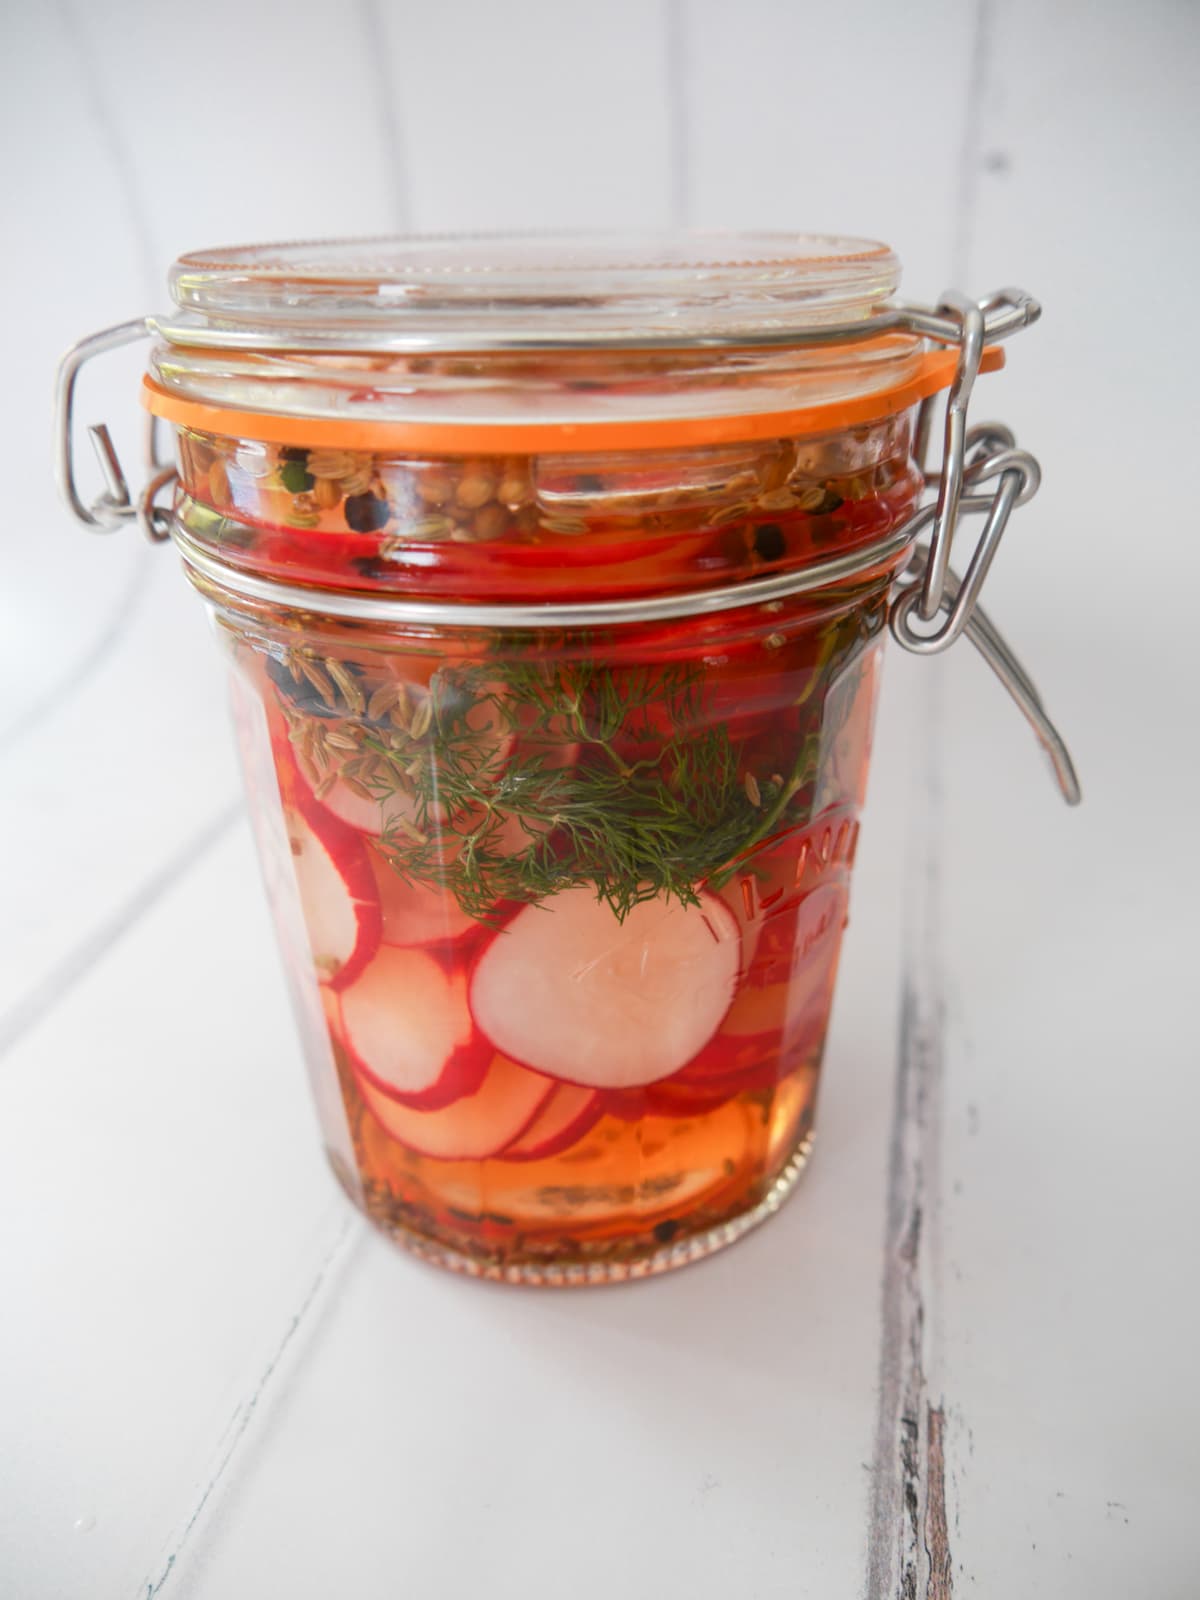 A mason jar filled with pickled radish, dill fronds and whole spices.